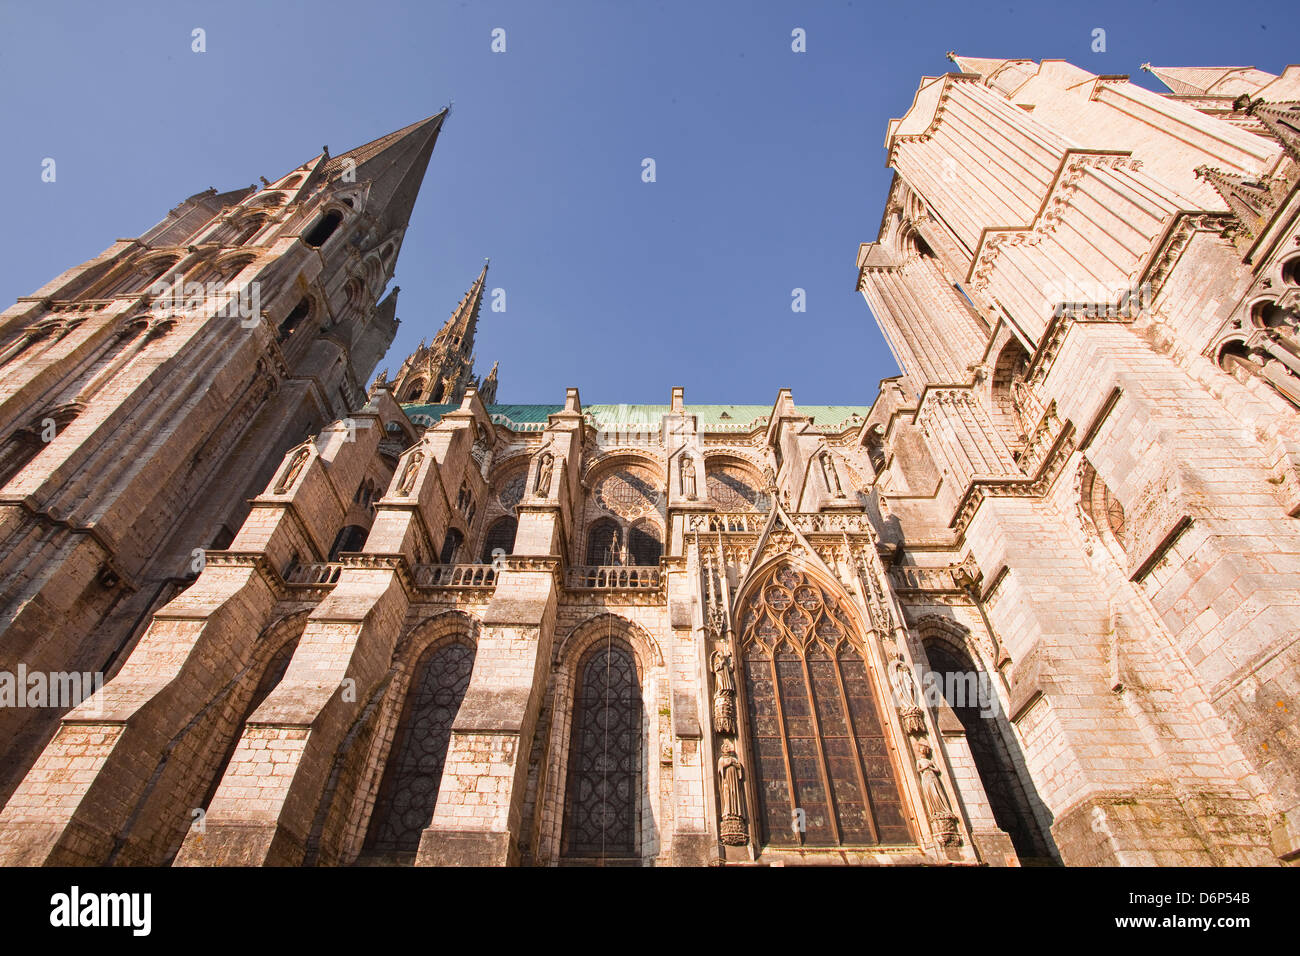 Gothic architecture on Chartres Cathedral, UNESCO World Heritage Site, Chartres, Eure-et-Loir, Centre, France, Europe Stock Photo